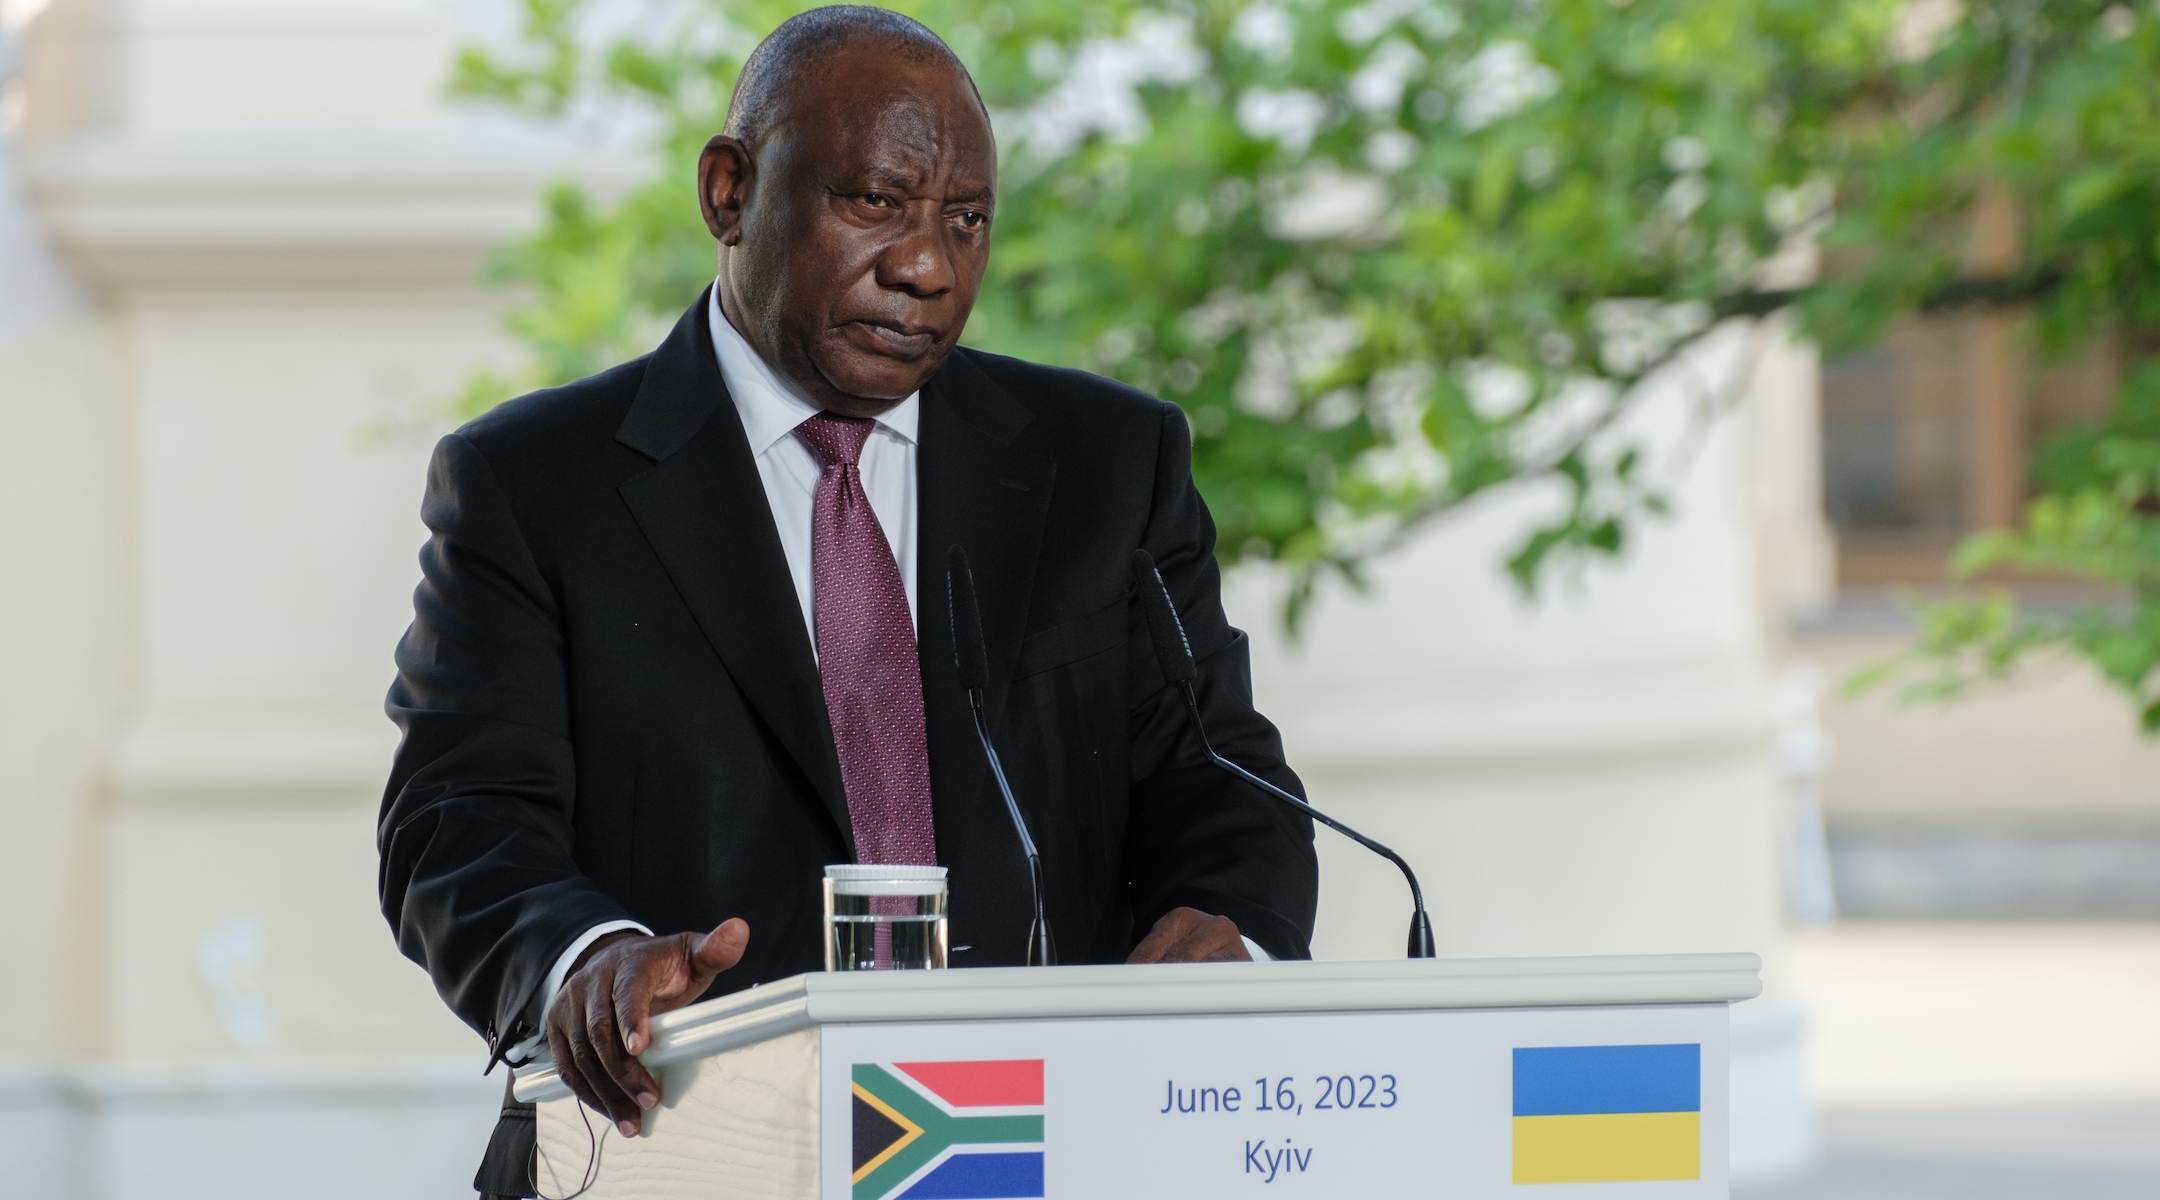 South African President Cyril Ramaphosa speaks during a press conference in Kyiv on June 16, 2023. (Vitalii Nosach/Global Images Ukraine via Getty Images)